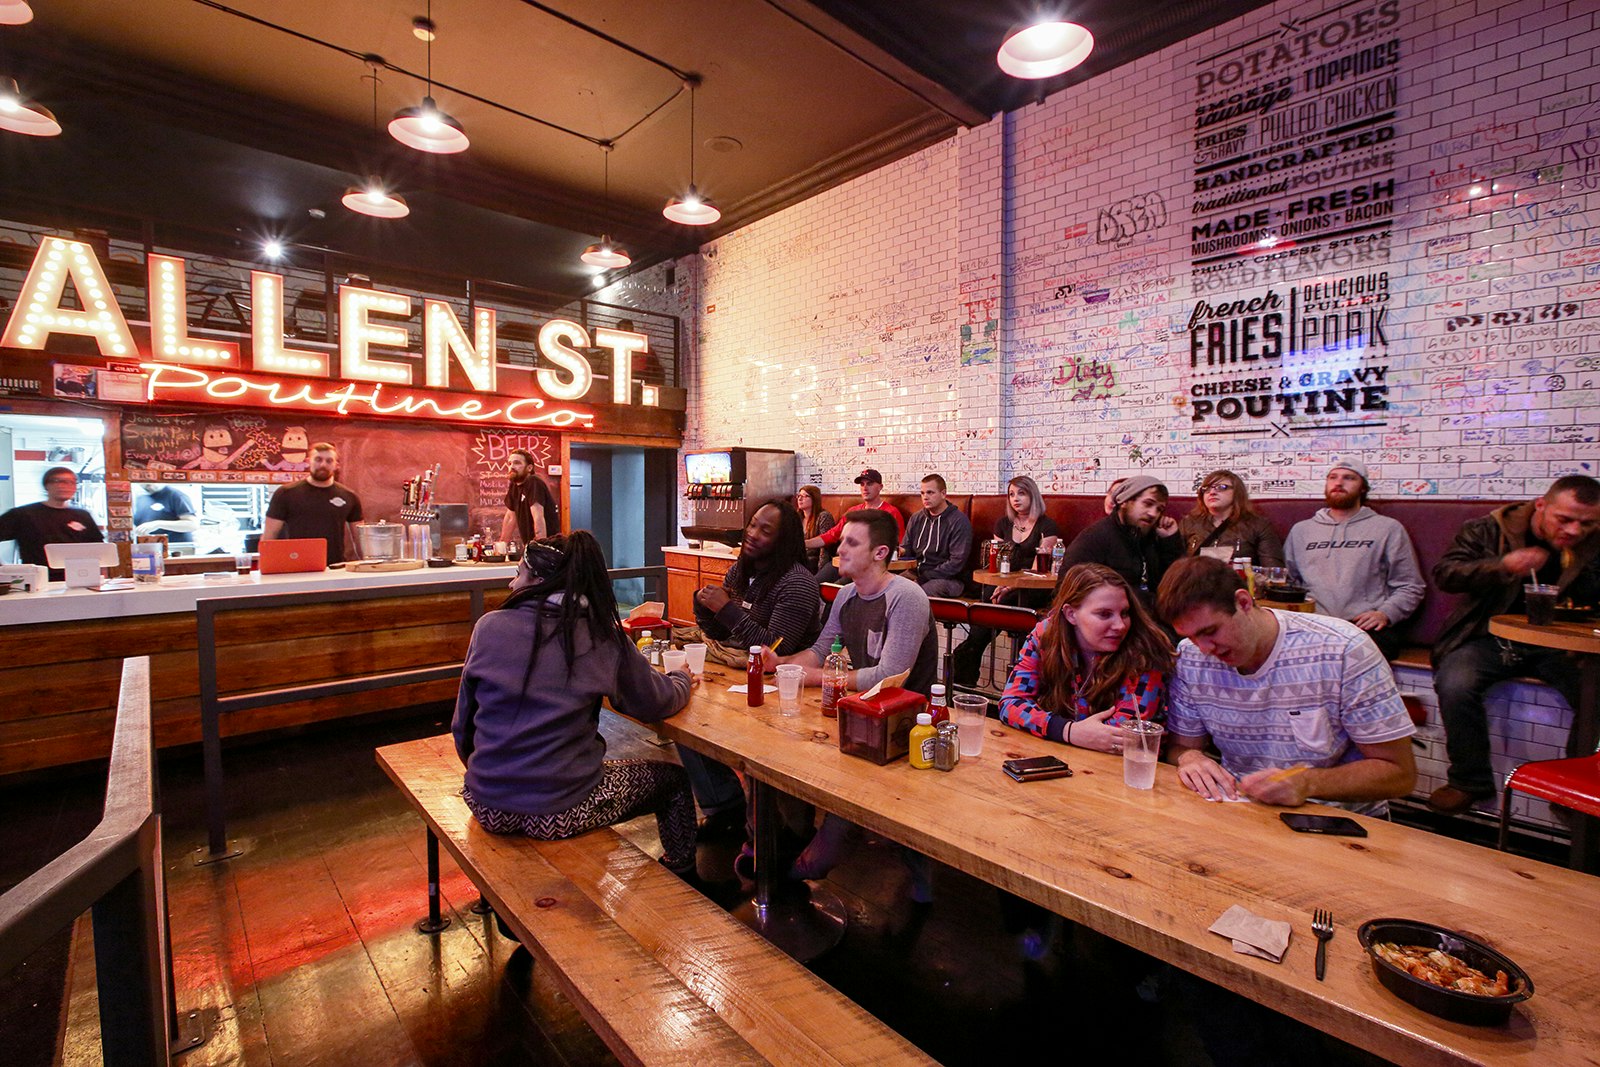 People sit at long wooden tables eating poutine. The counter is visible, with a large neon sign that says "Allen St. Poutine Co." above it. Buffalo, NY.